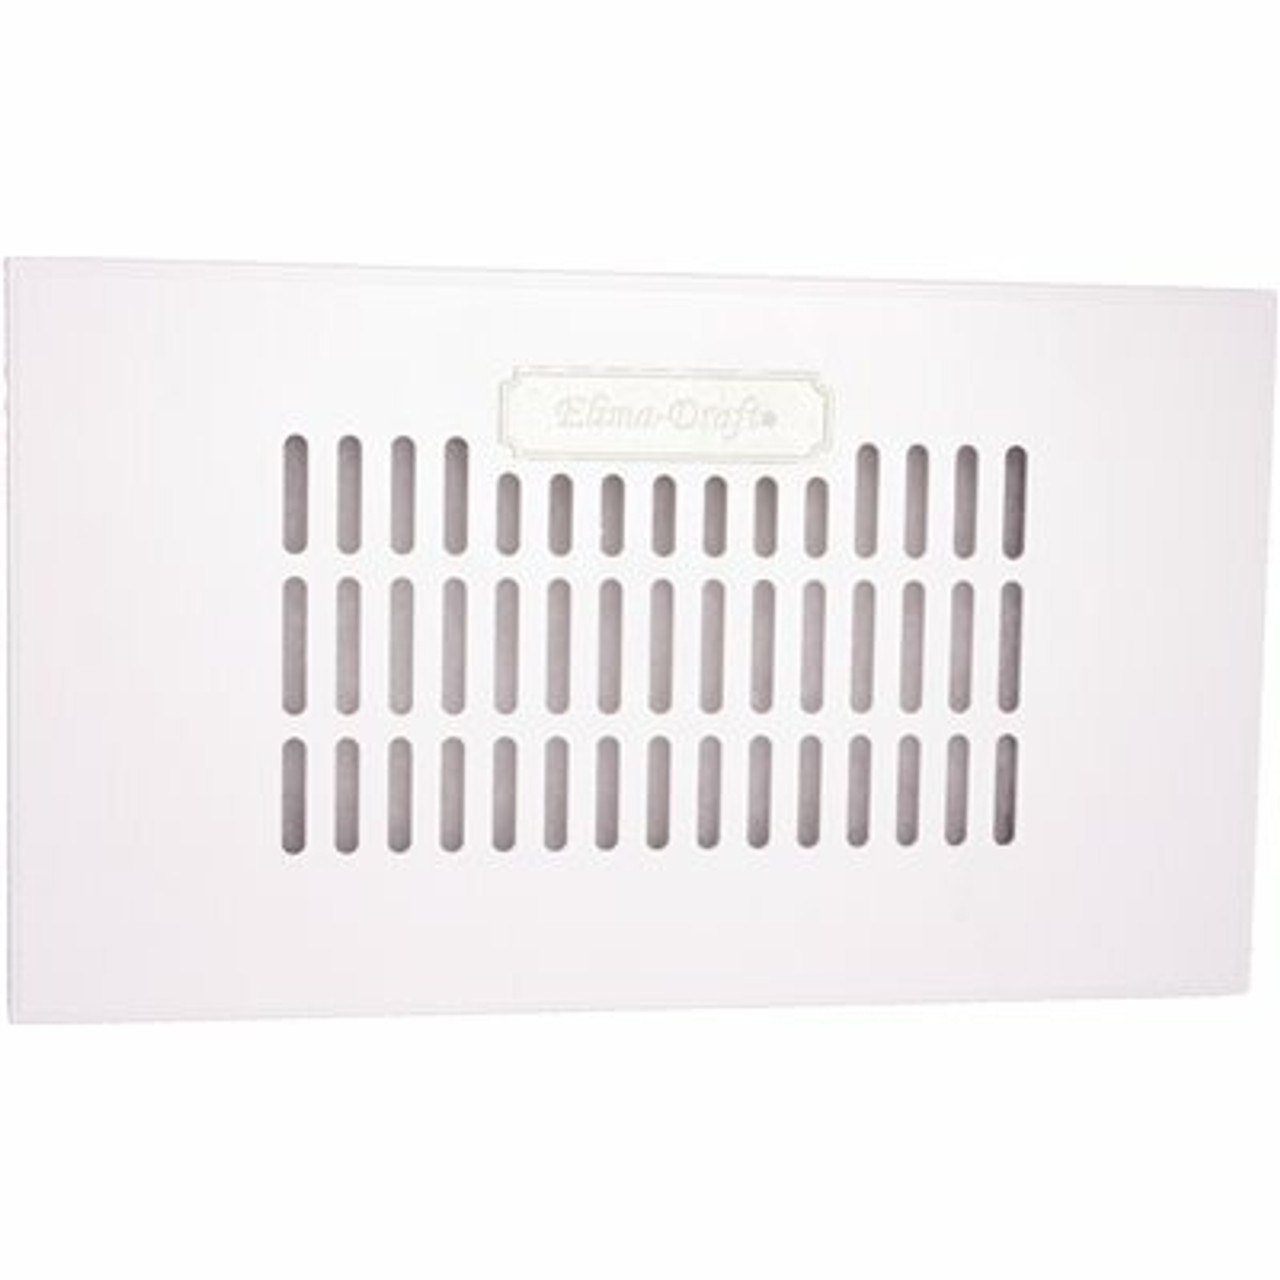 Elima-Draft 4-In-1 Allergen Relief Magnetic Vent Cover In White